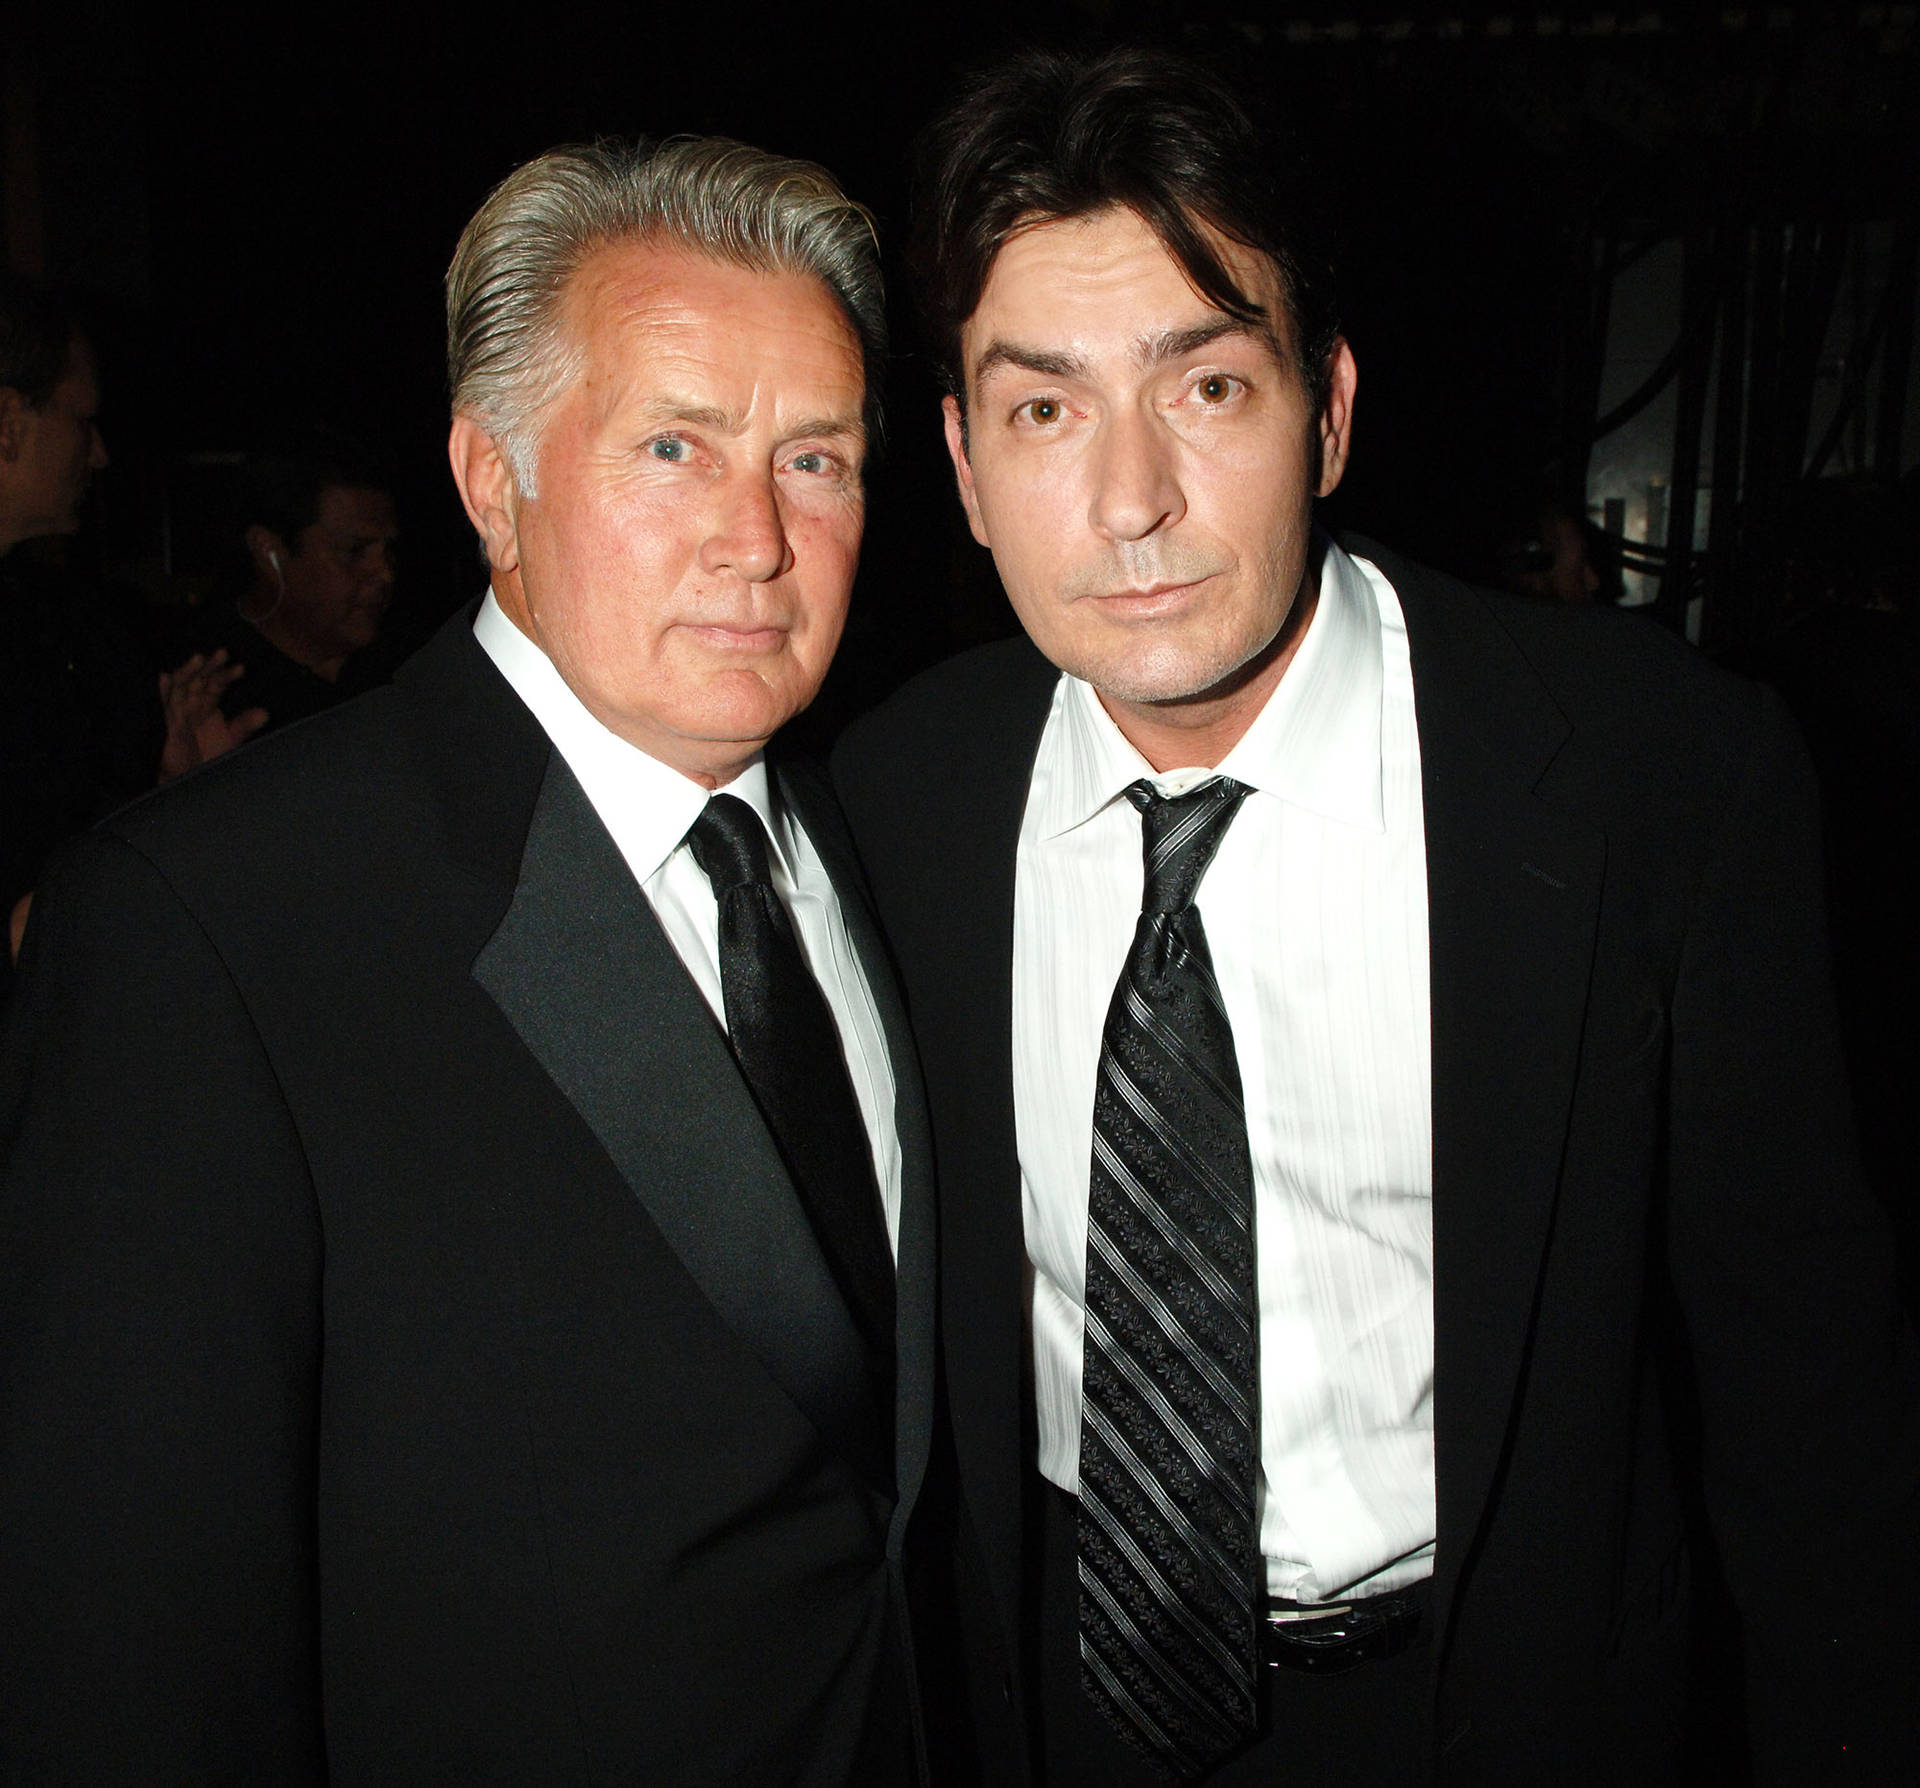 Martinsheen Och Charlie Sheen Emmy Awards Bakstegsfotografi. (note: This Is A Direct Translation. The Sentence Could Be Rephrased To Sound More Natural In Swedish.) Wallpaper